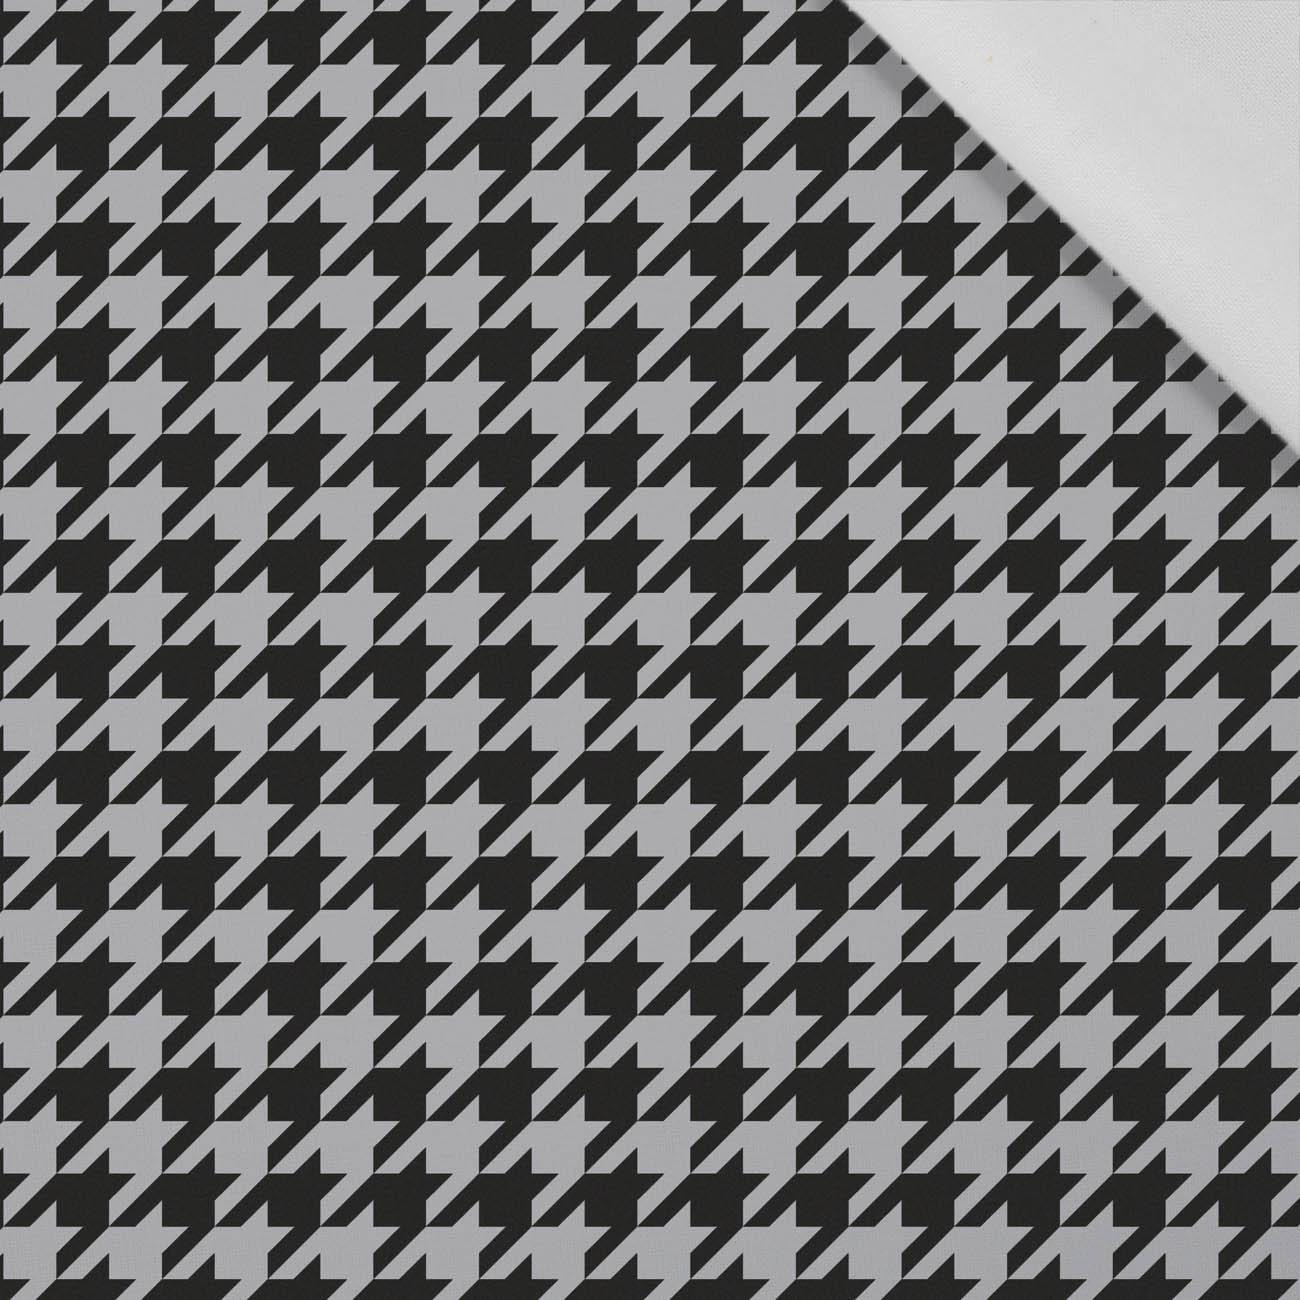 BLACK HOUNDSTOOTH / grey - Cotton woven fabric